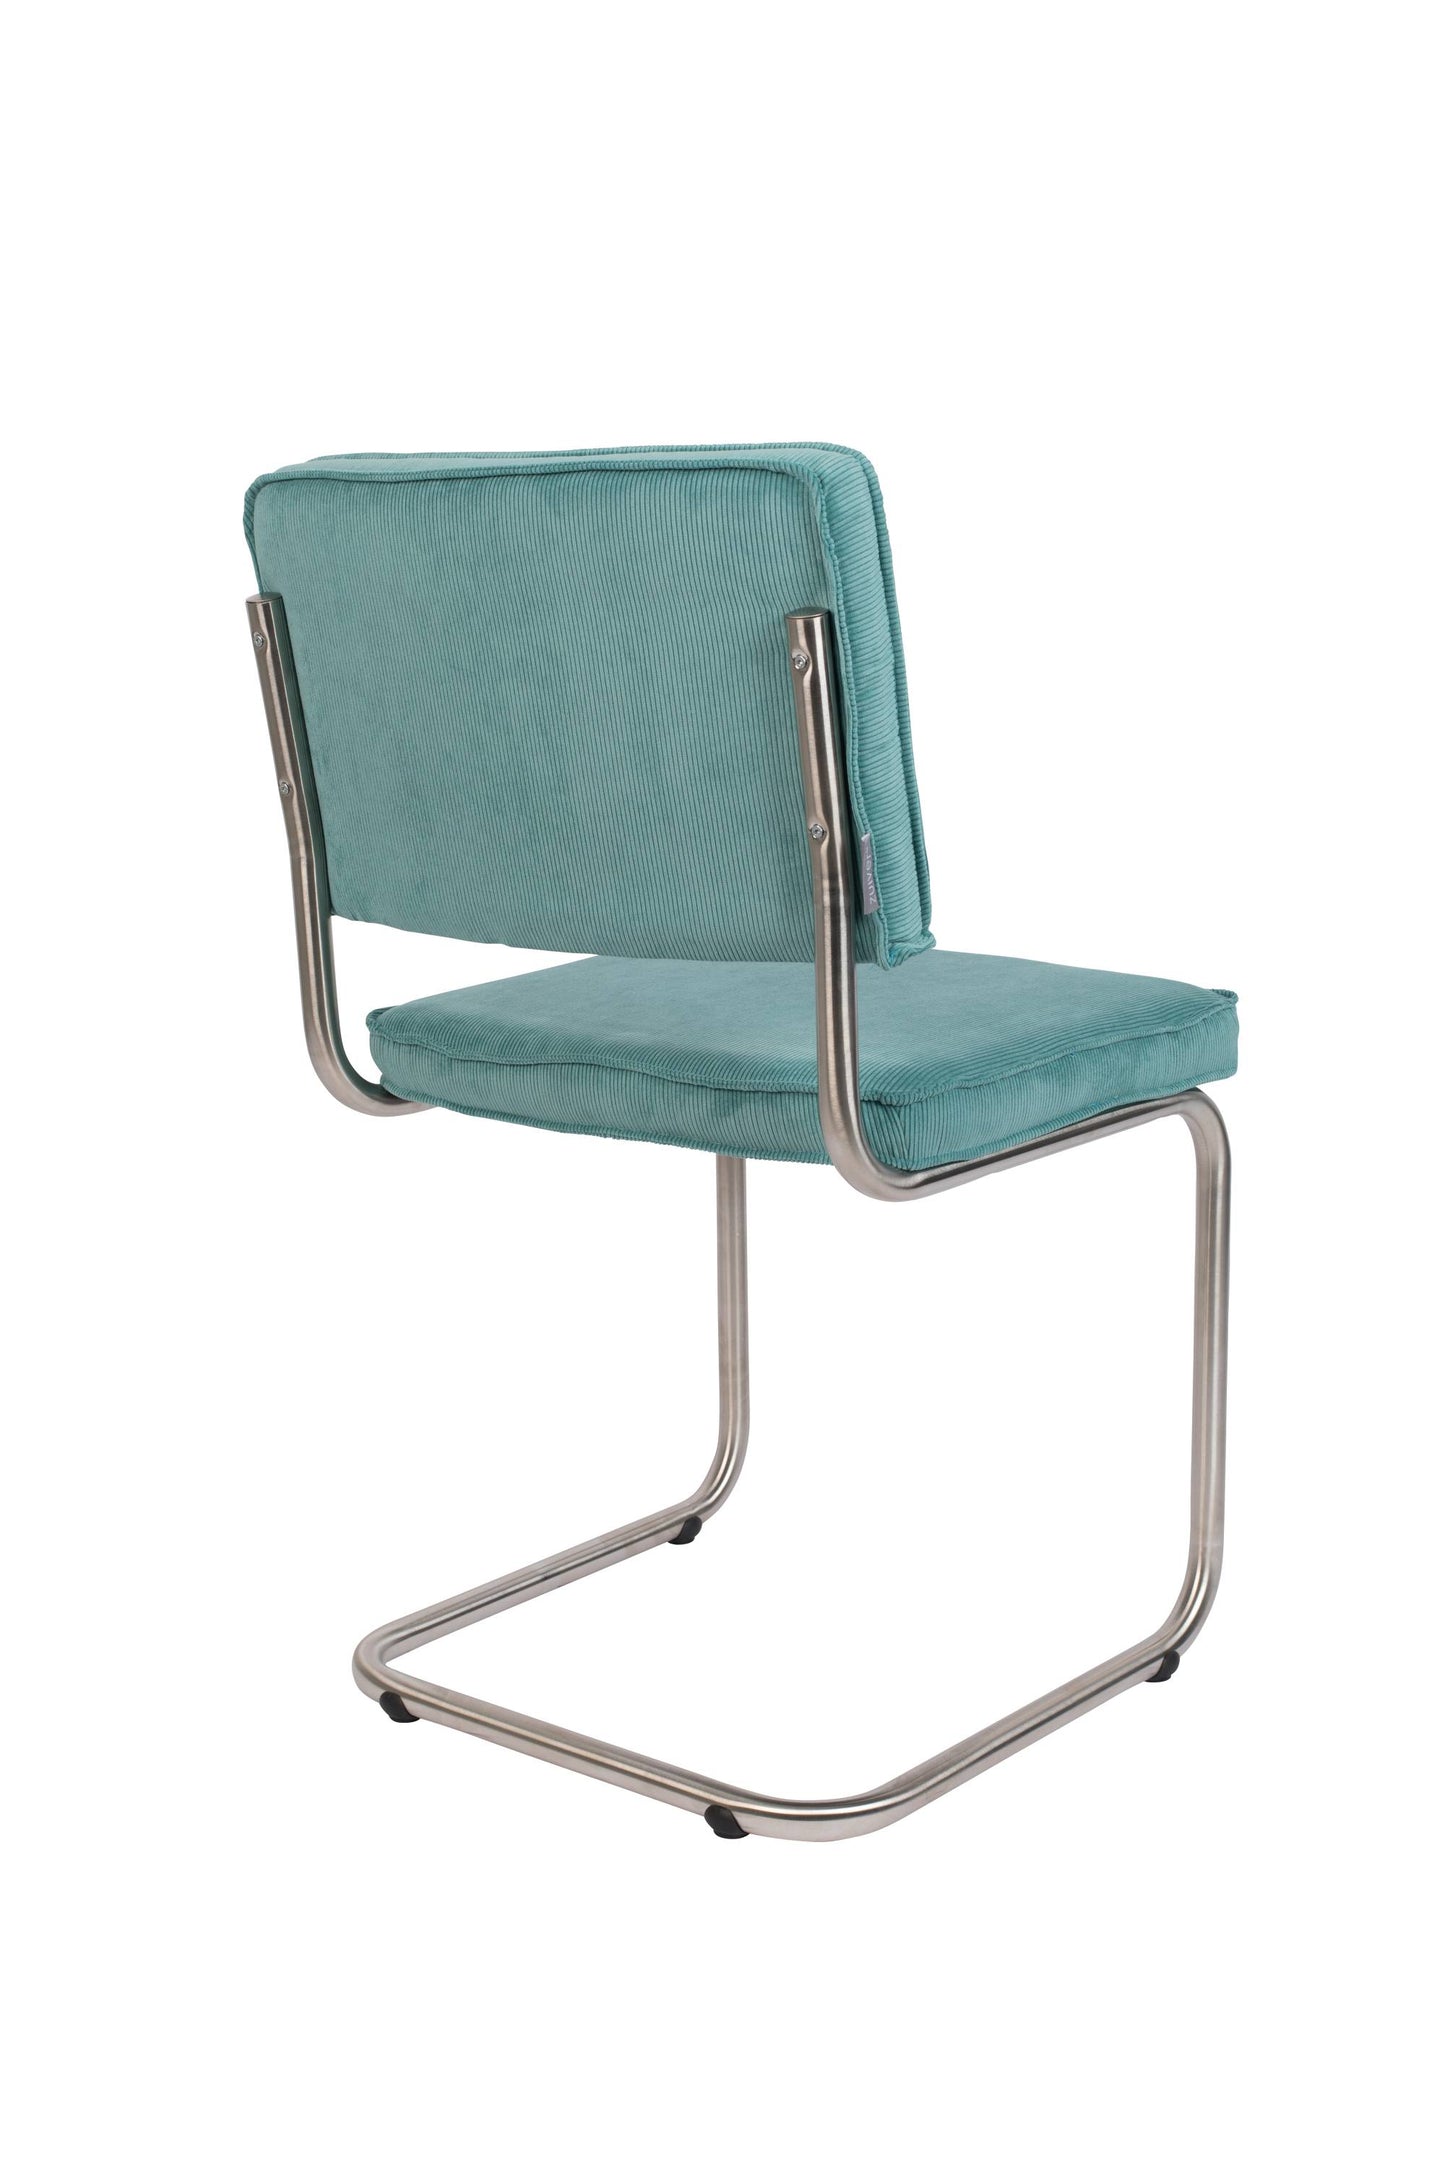 Zuiver | CHAIR RIDGE BRUSHED RIB BLUE 12A Default Title